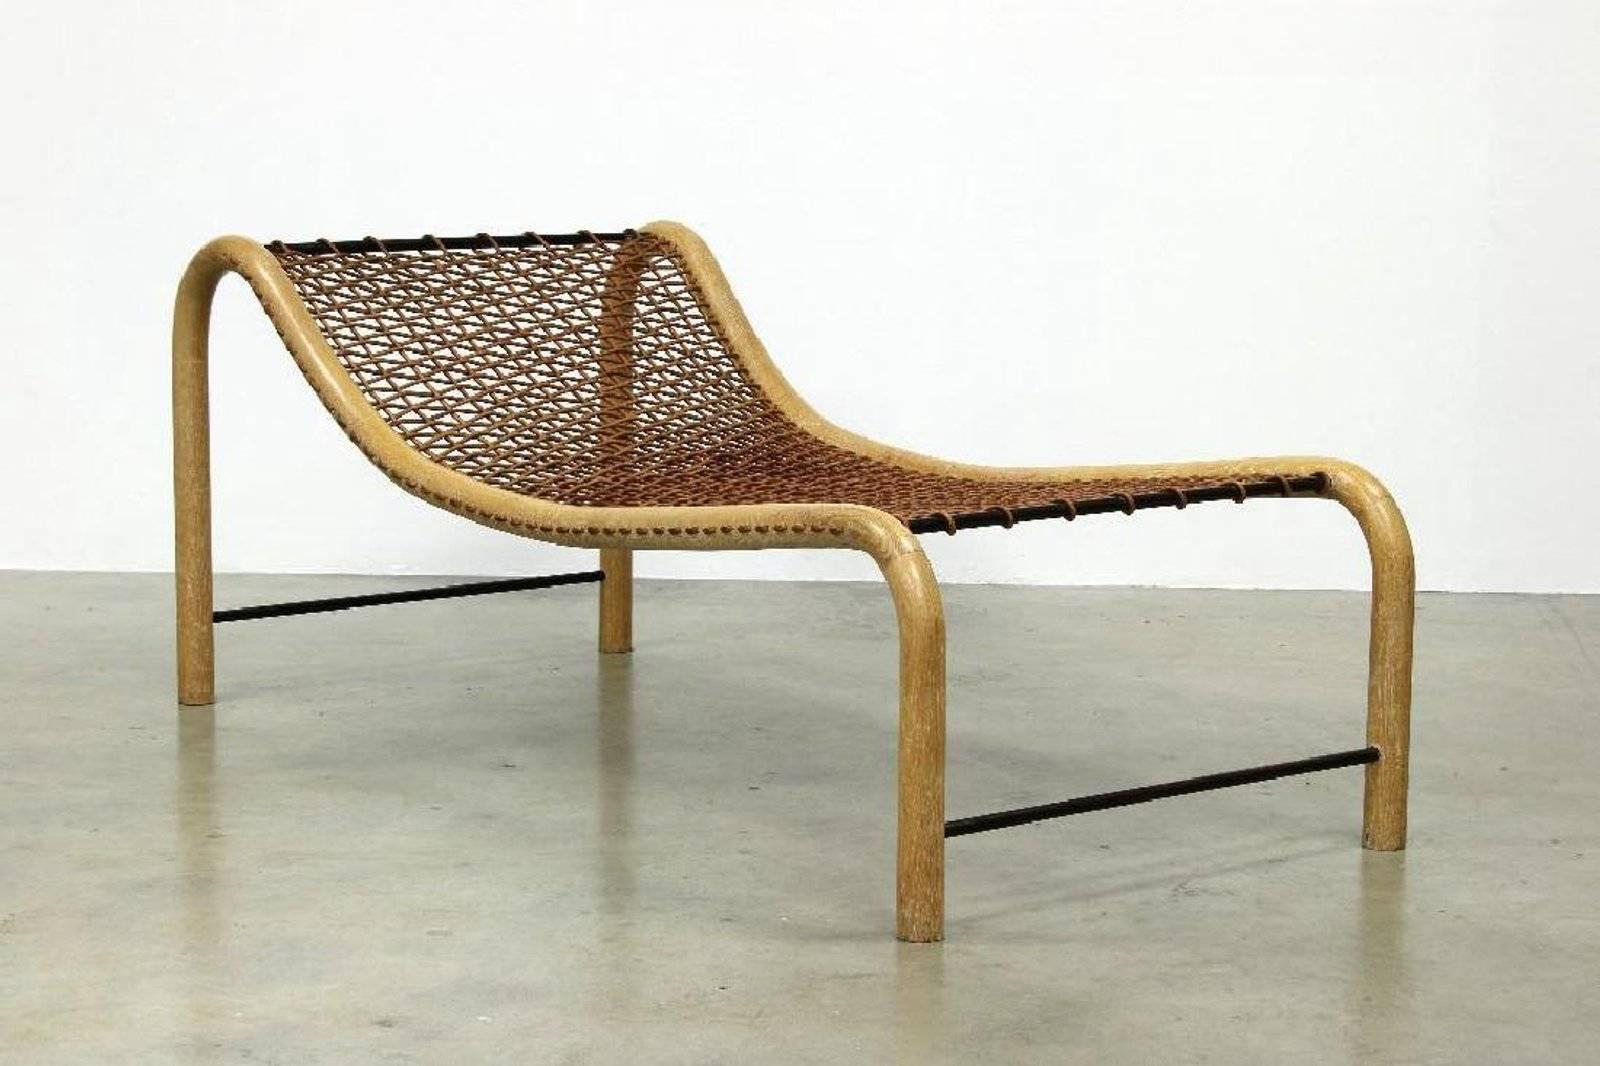 Ultra modern pair of oversized woven leather and bentwood chaise lounges. The finish is a cerused finish. Designed by Important Los Angeles designer William Emmerson.